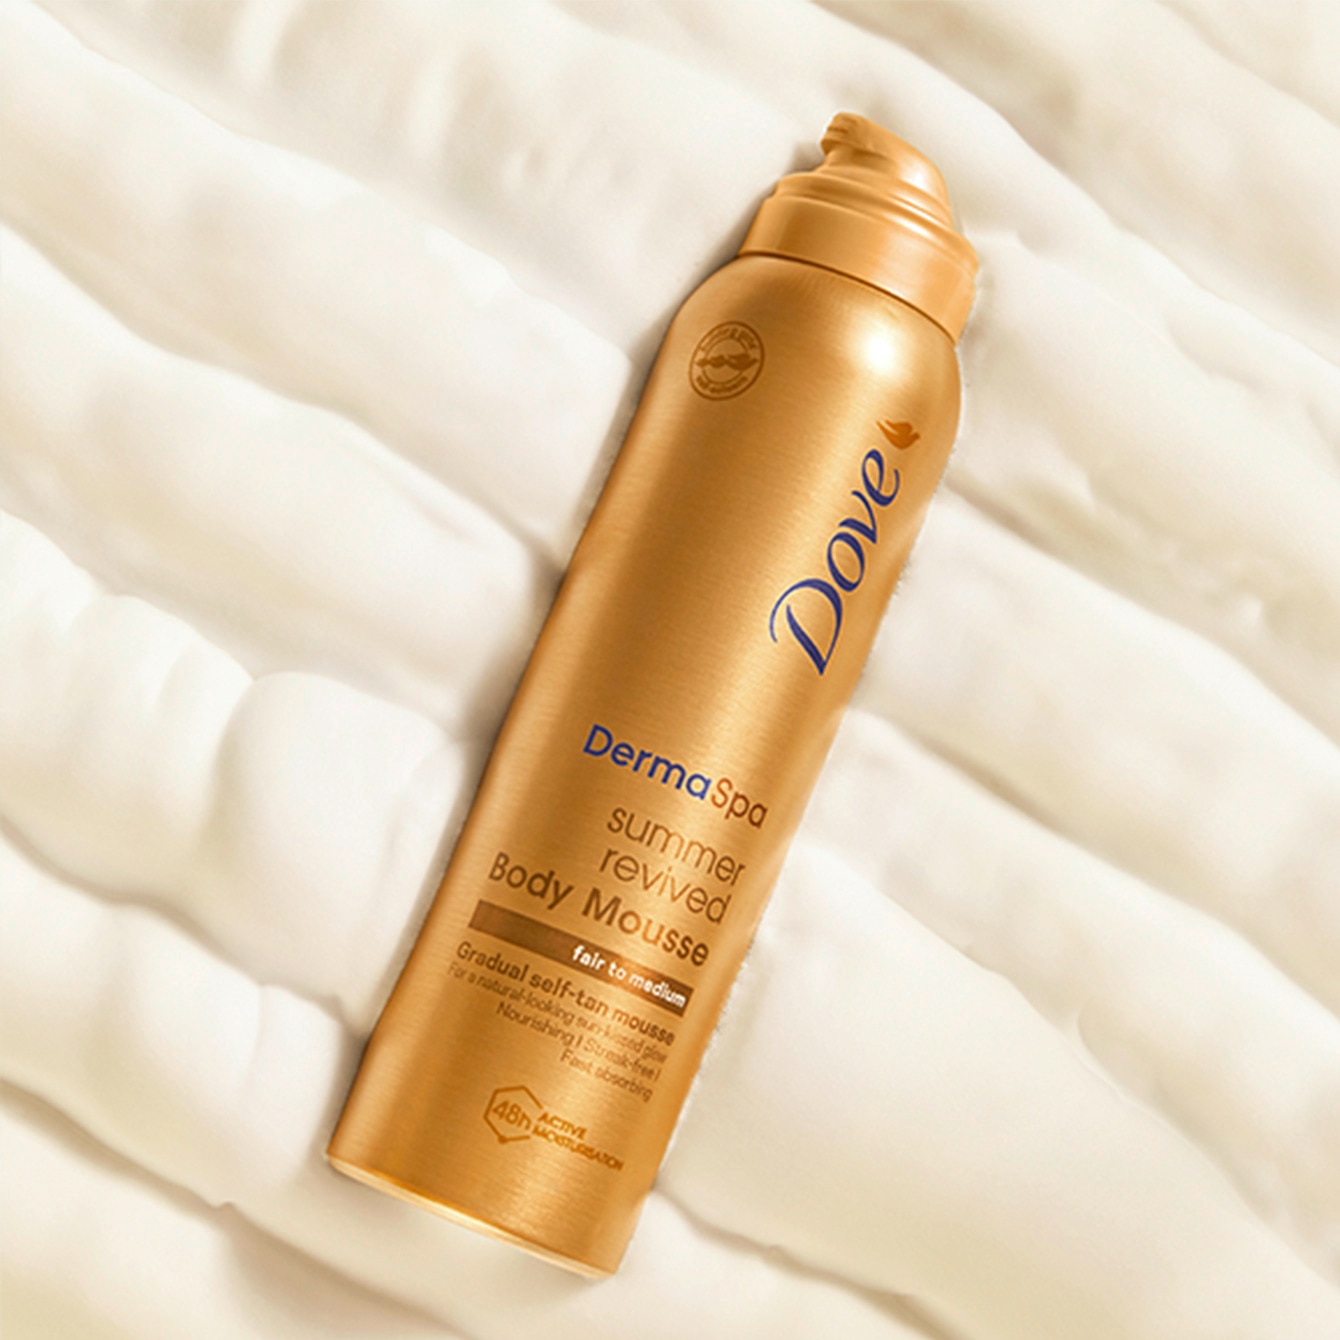 Dove Get glowing skin with our ultimate self-tan body mousse